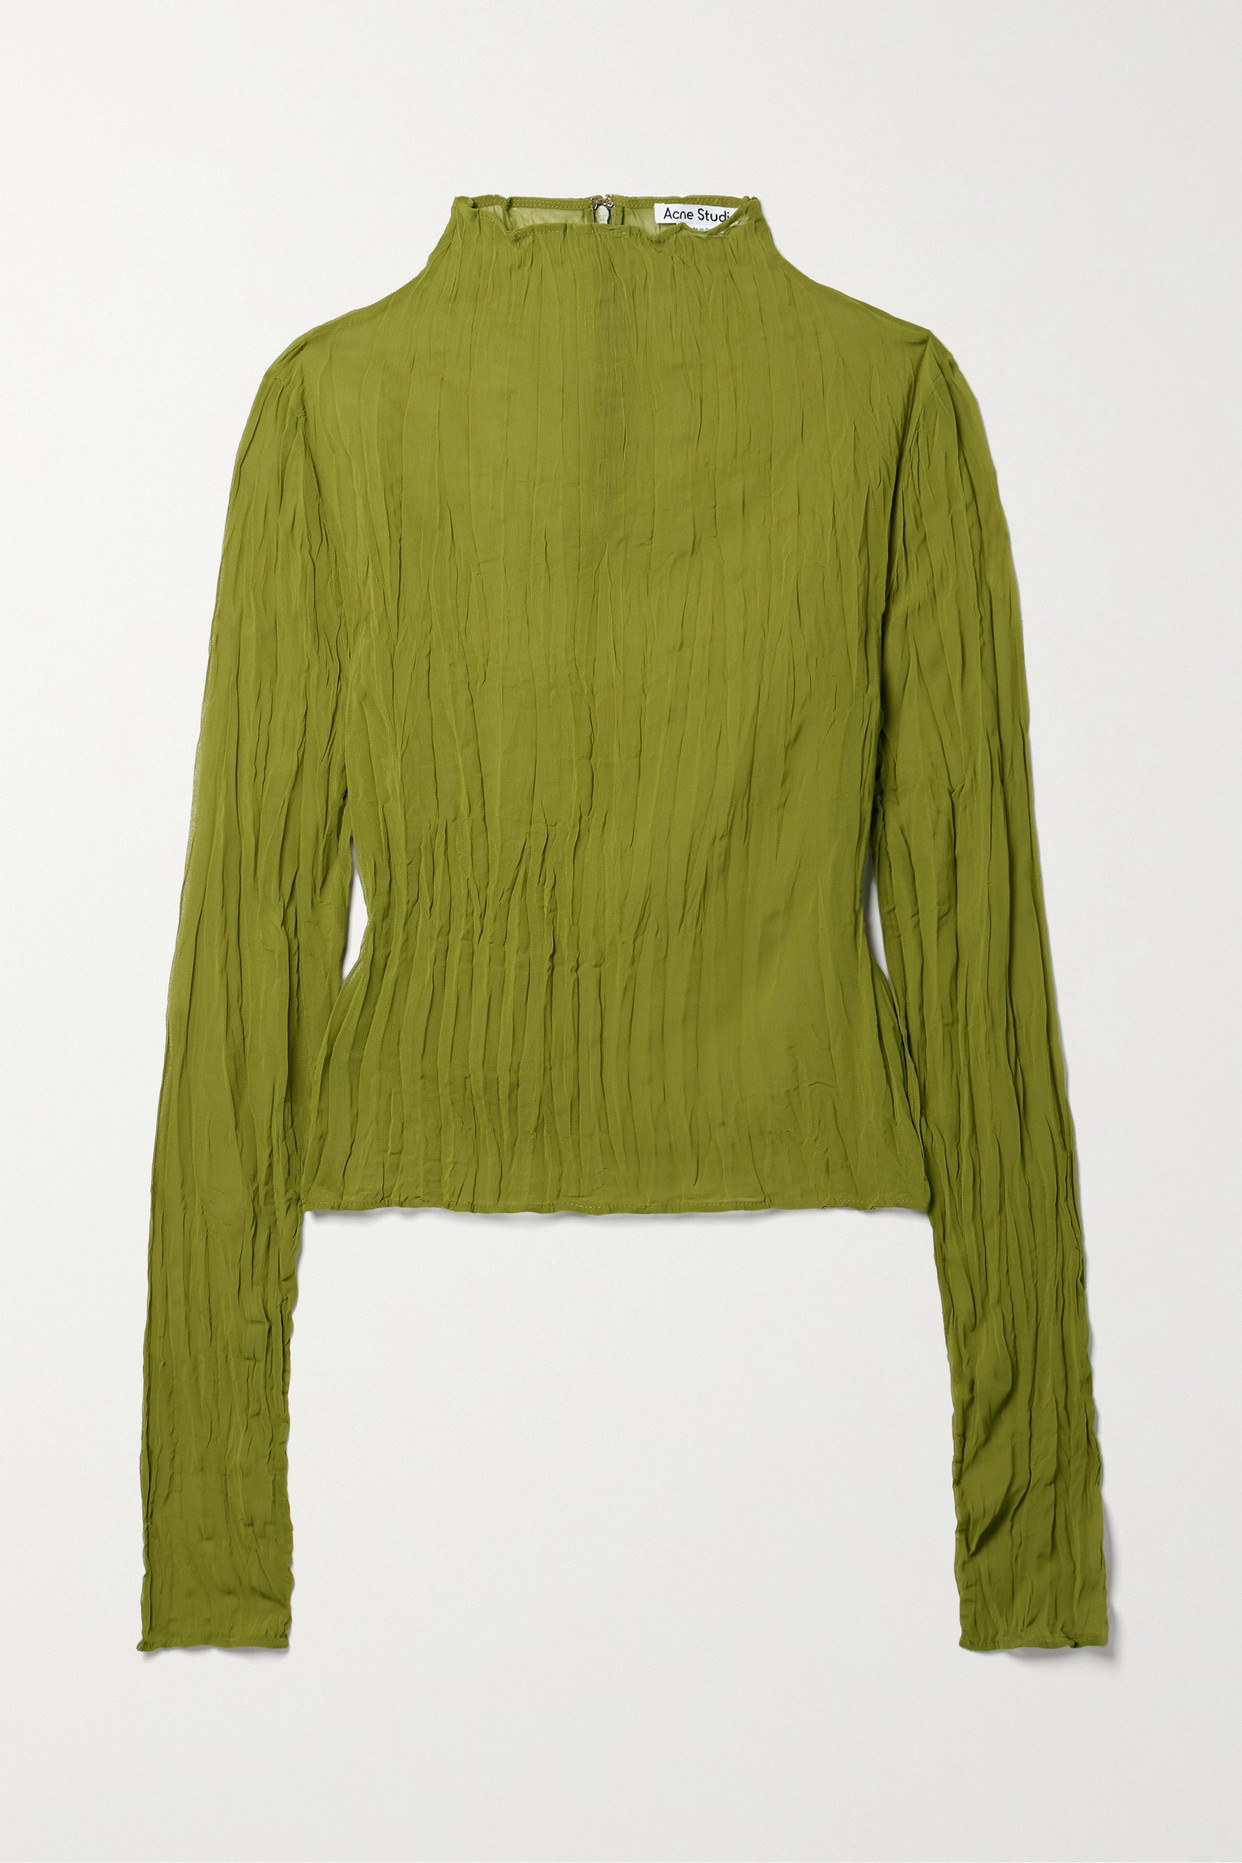 Crinkled-Georgette Long-Sleeve Top in olive green with a mock neck